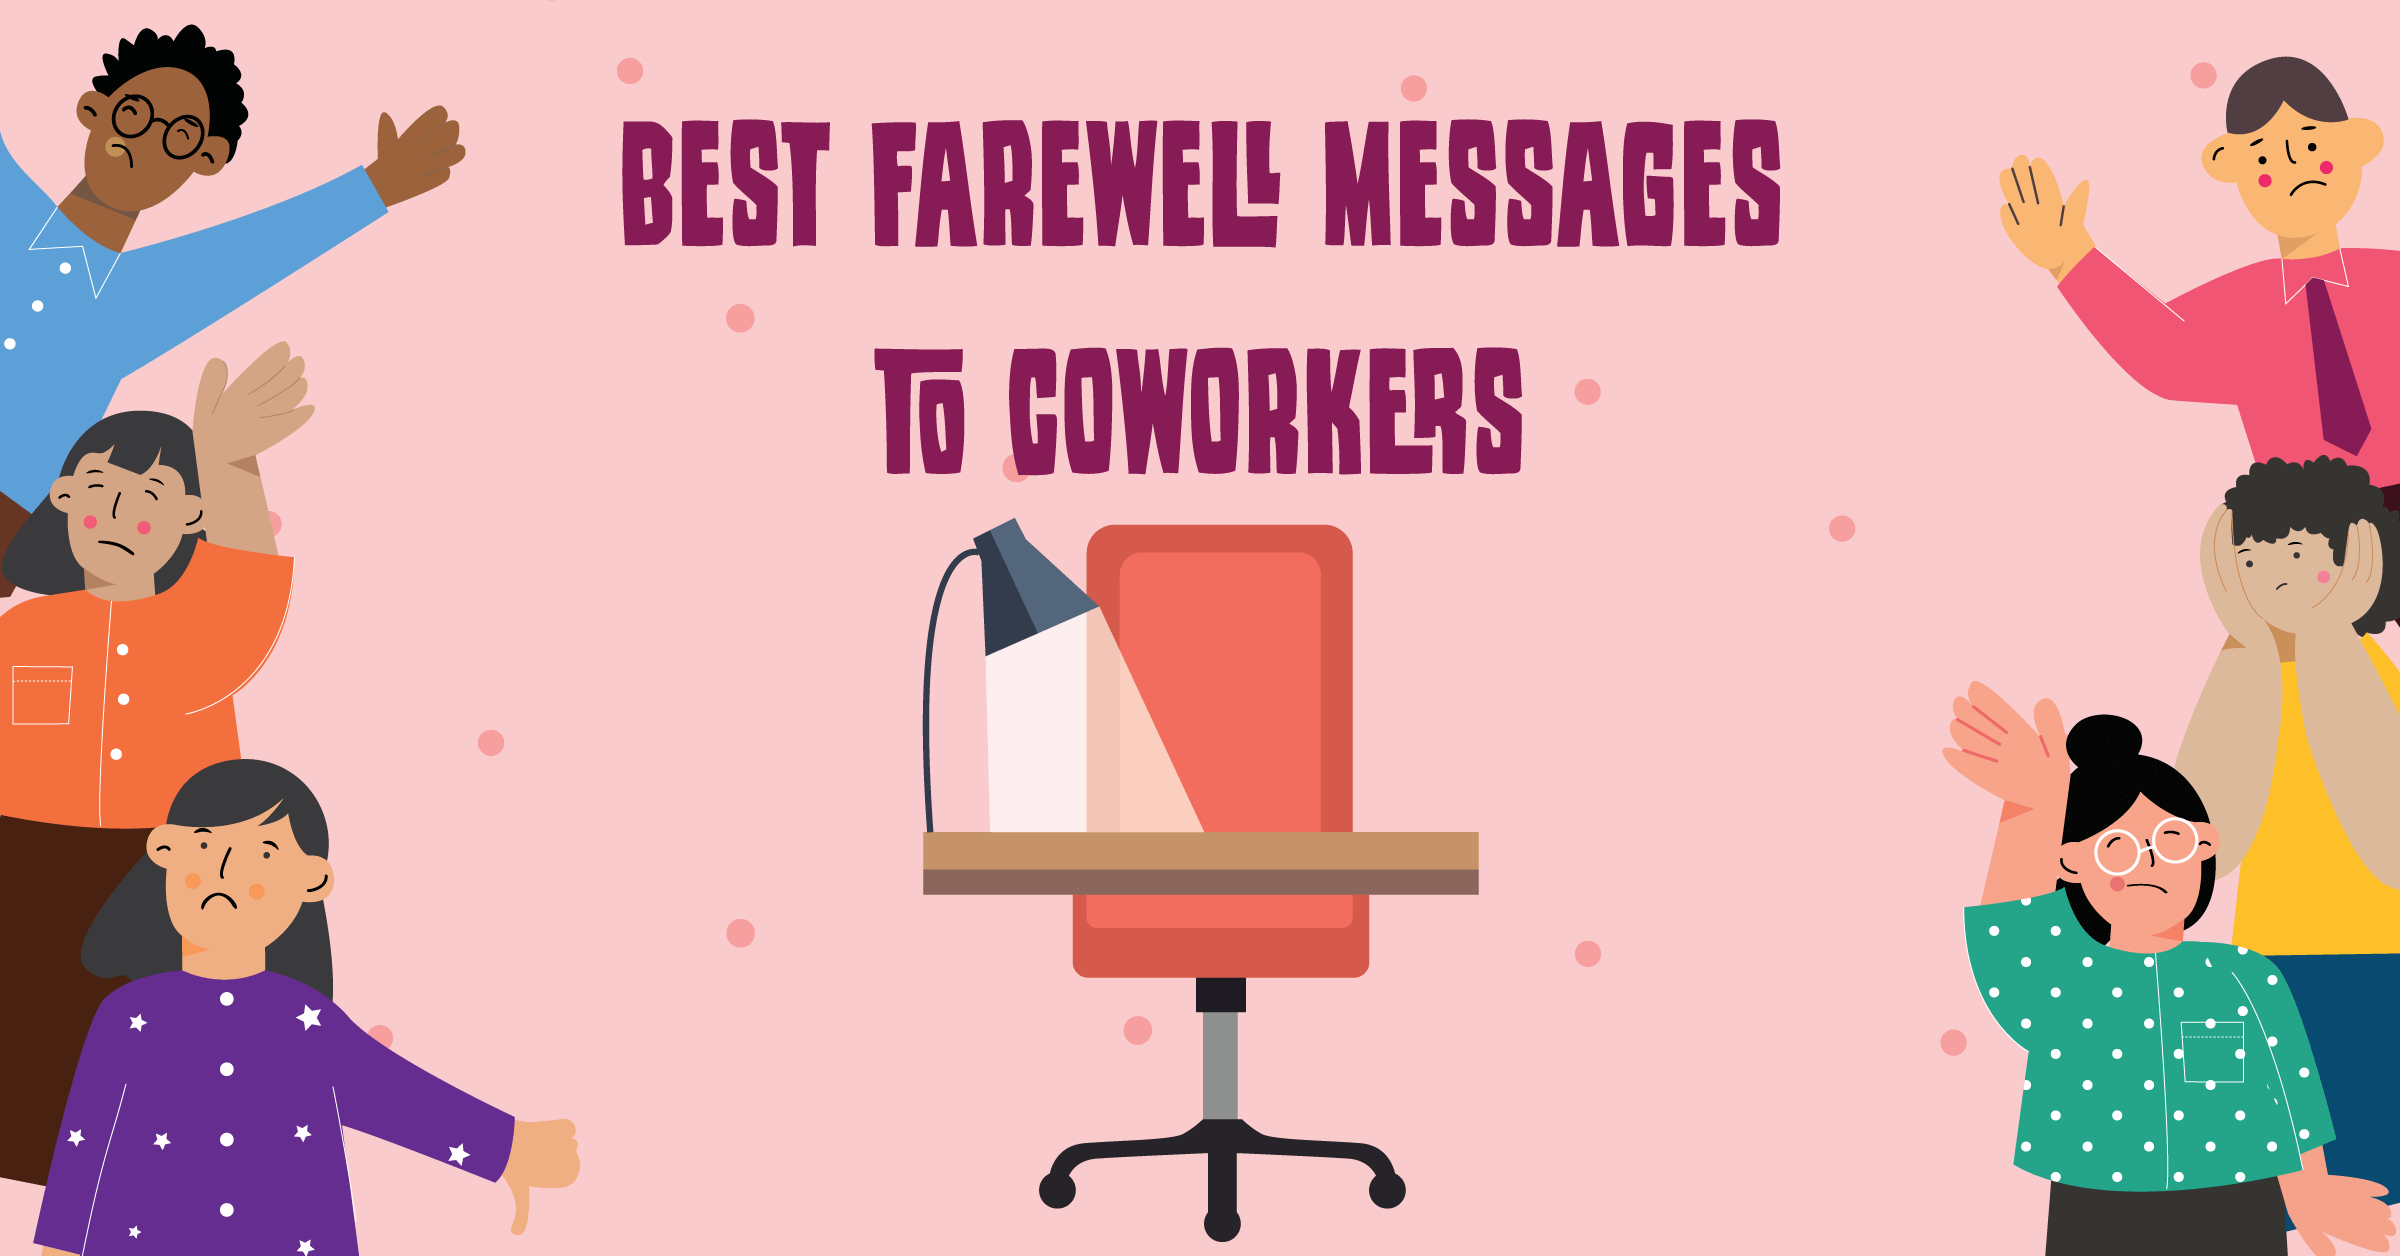 100+ Best farewell messages to coworkers leaving the company in 2022